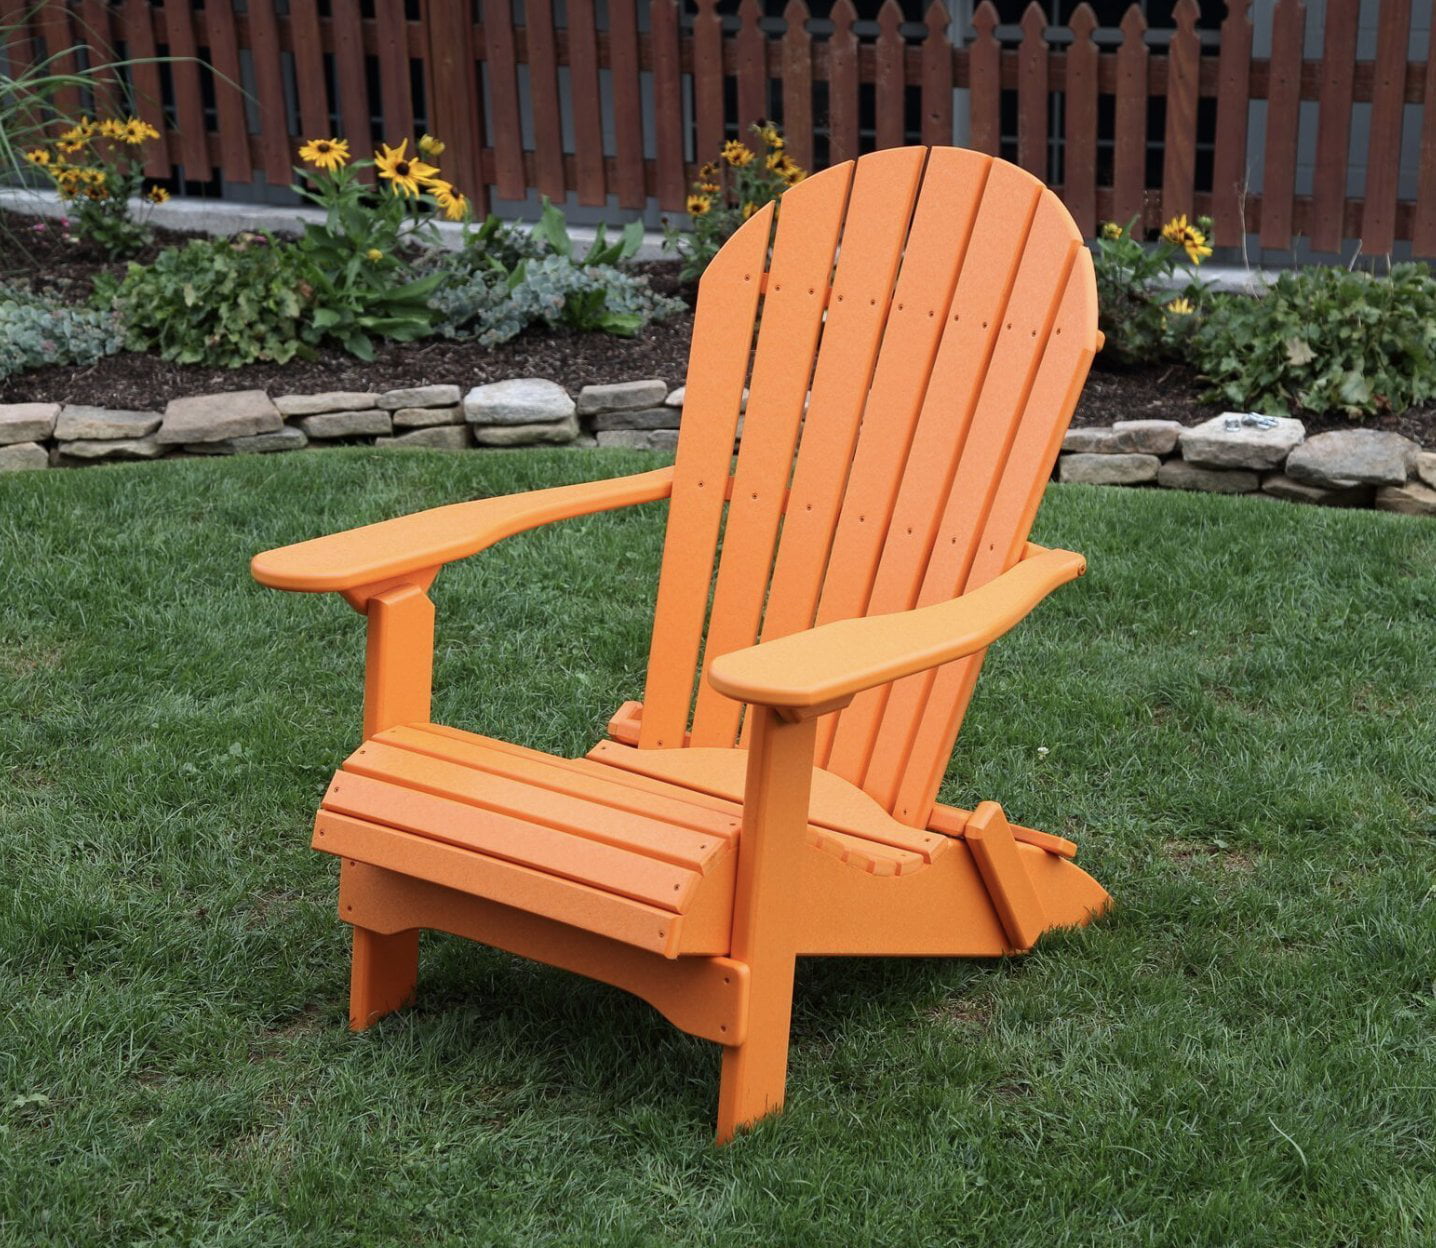 ARUBA BLUE-POLY LUMBER Folding Adirondack Chair with Rolled Seating Heavy Duty EVERLASTING Lifetime PolyTuf HDPE MADE IN USA AMISH CRAFTED